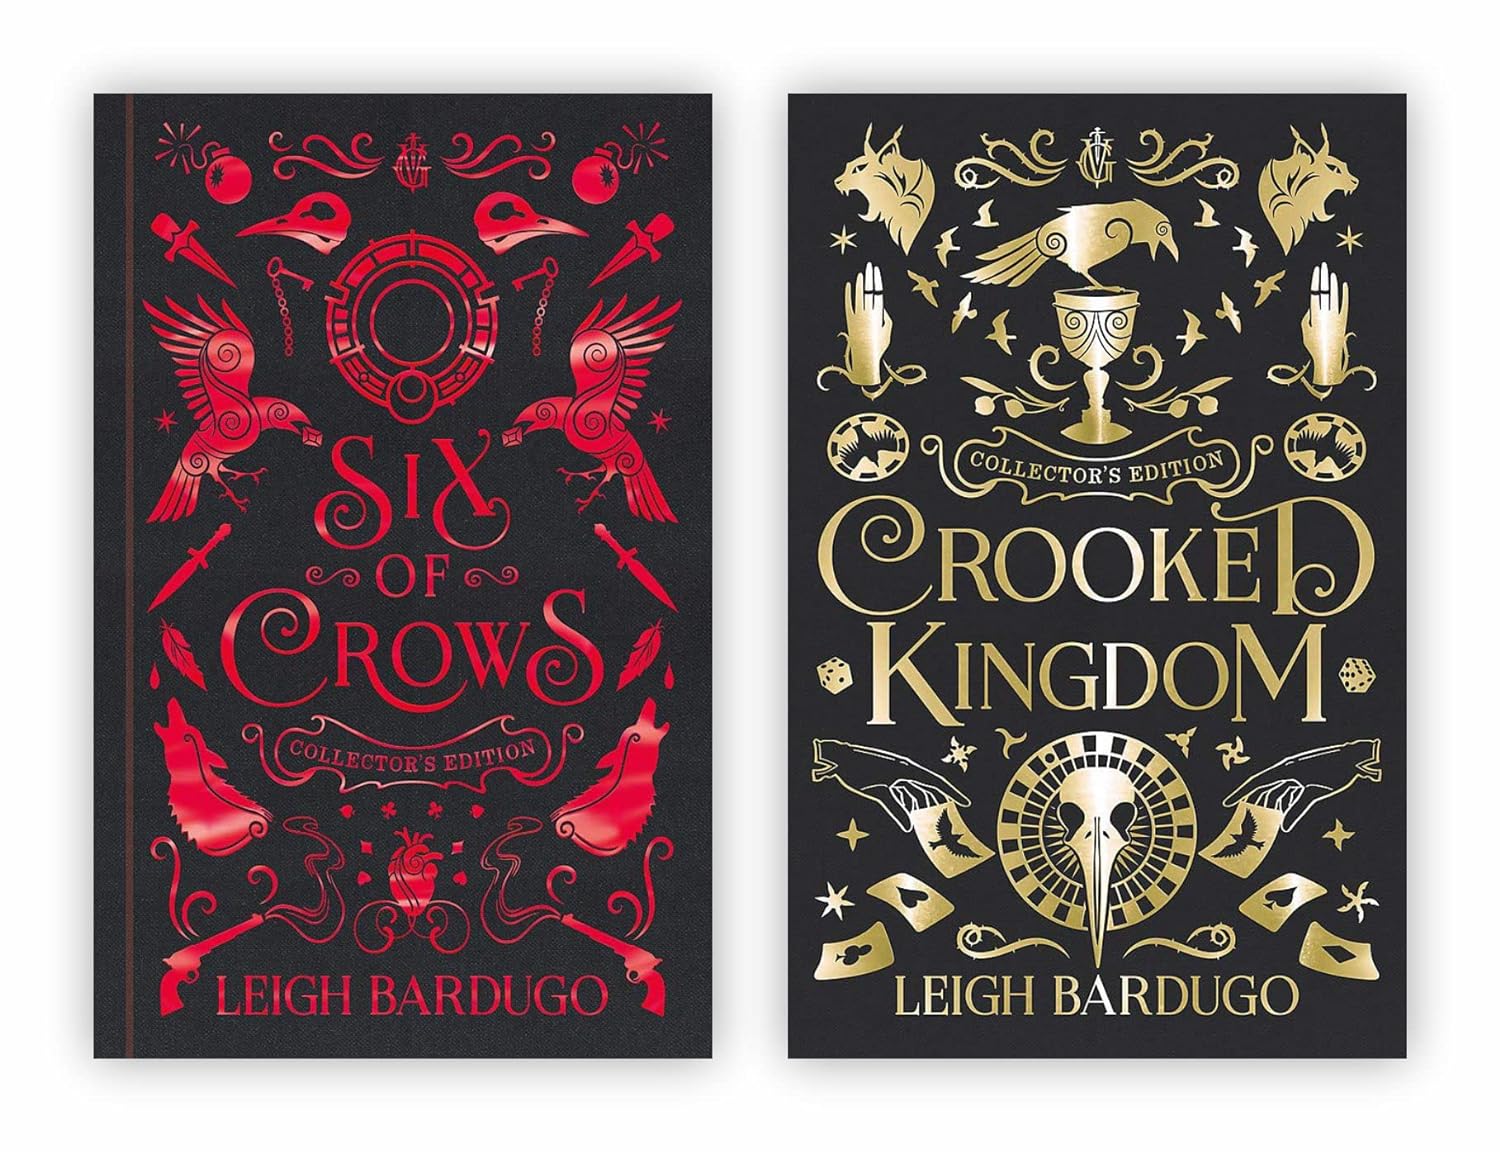 Six of Crows collectors editions with small details of events 
and symbols to represent characters from the books.
